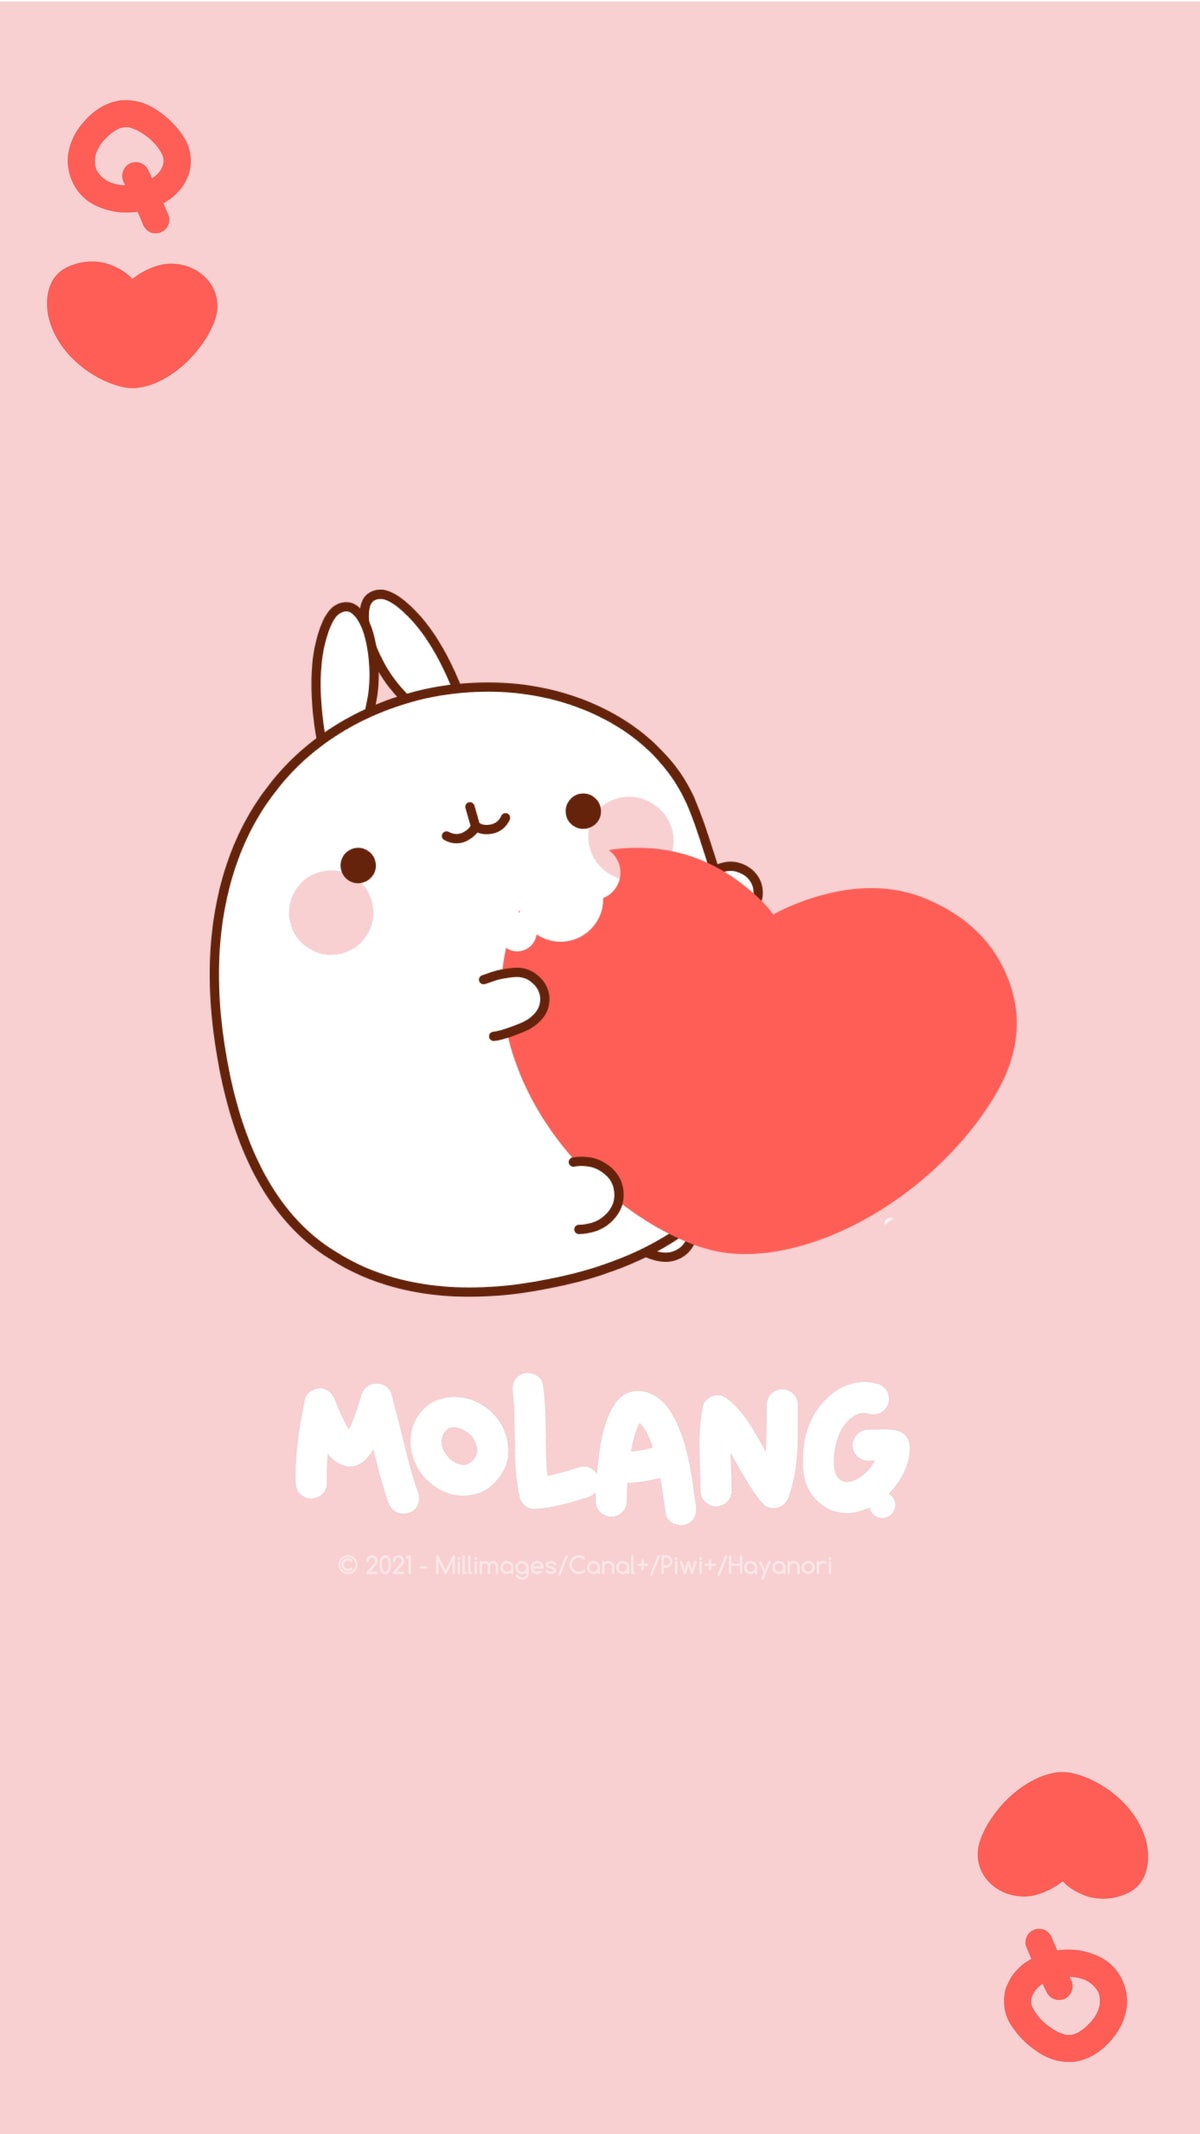 A cute Molang rabbit hugging a heart on a pink background - Molang